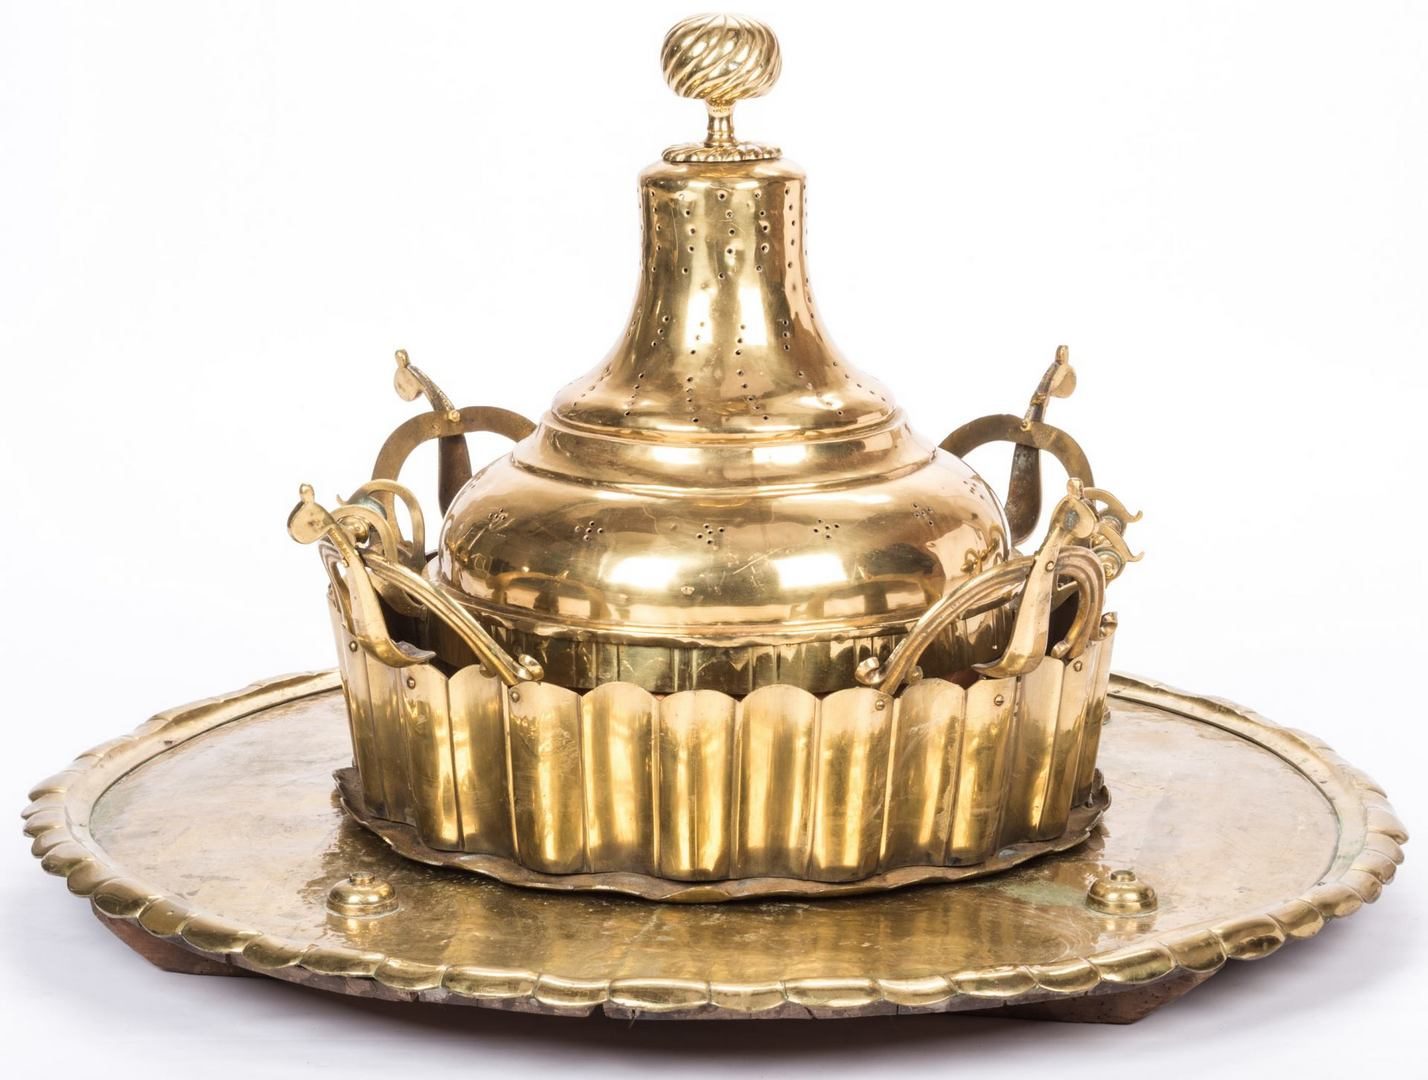 Lot 206: Large Brass Brazier or Censer with tray, 4 pcs.